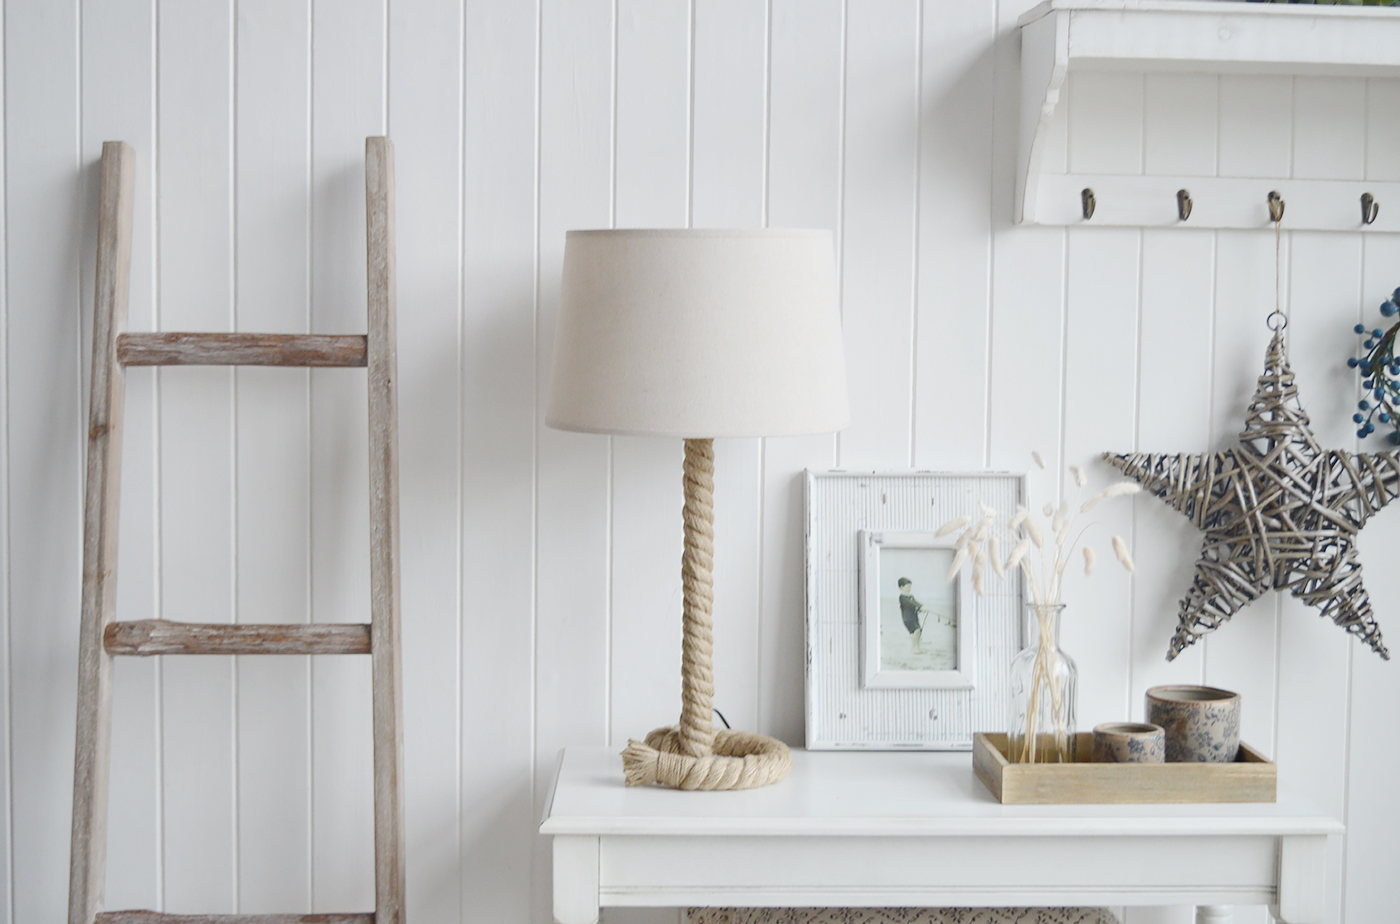 Rope Coastal table lamp  from The White Lighthouse Furniture. A lovely table lamp for bedside table or living room. New England furniture and interiors for coastal, country and city homes